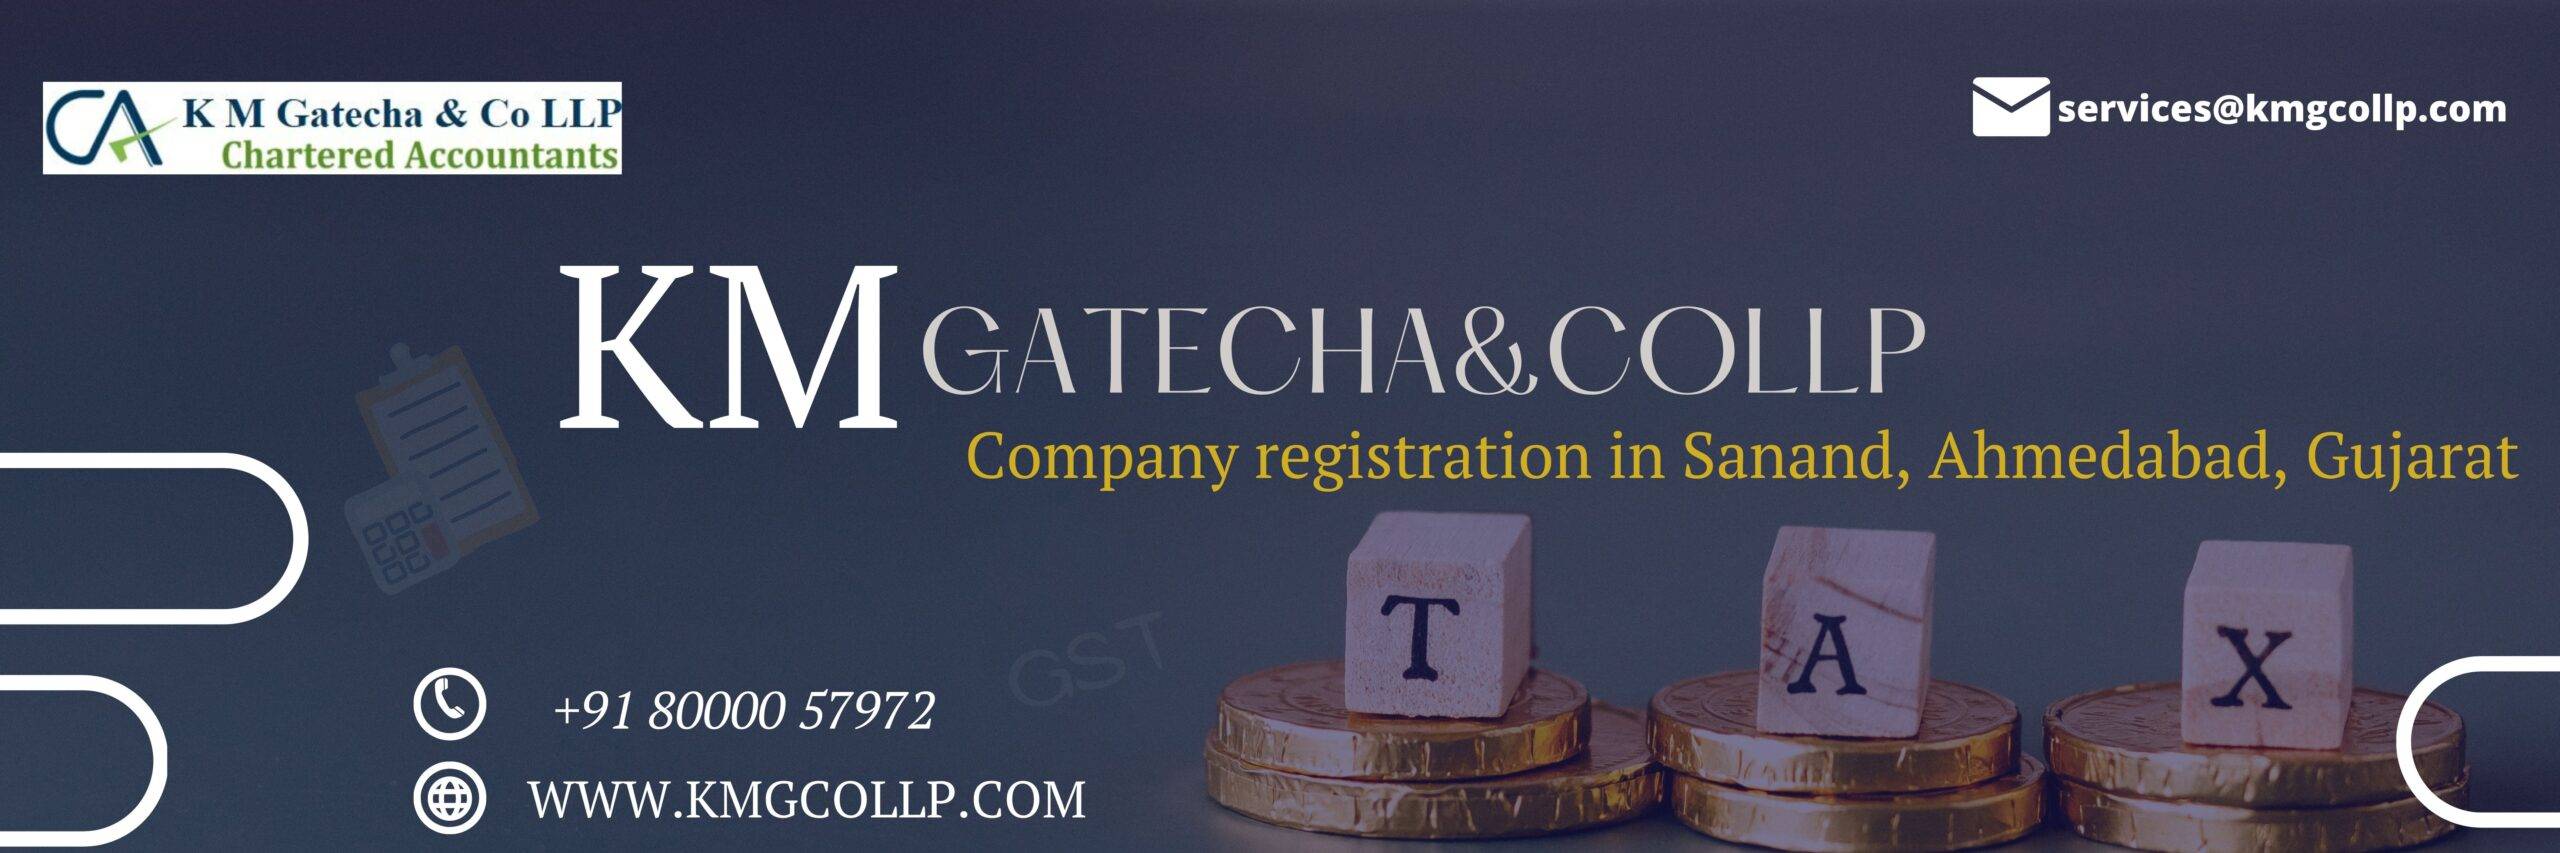 Company registration in sanand